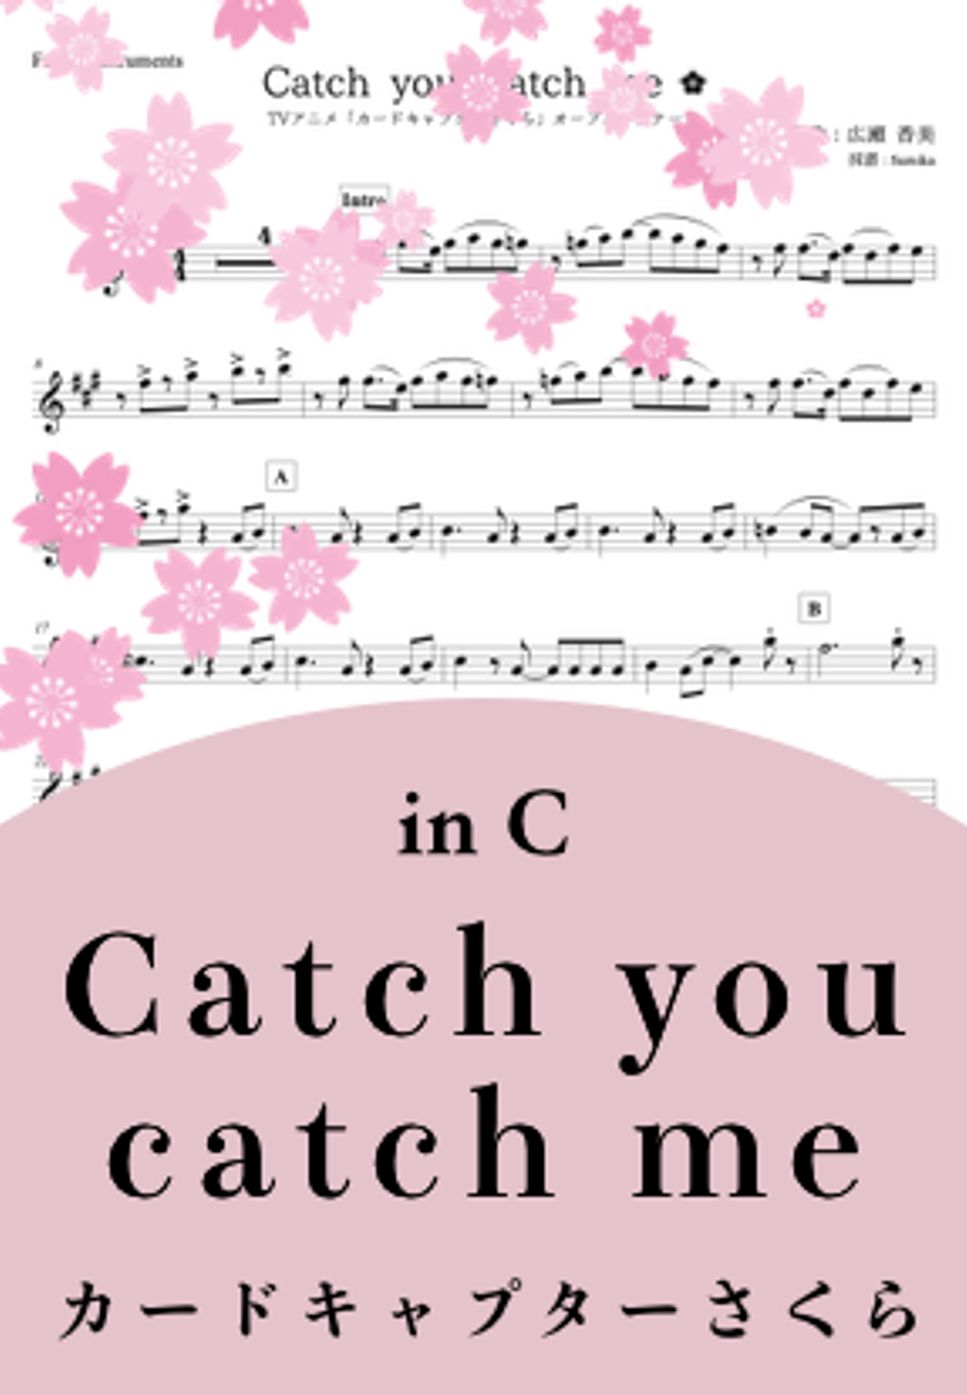 CCさくら - Catch you catch me (in C) by Sumika